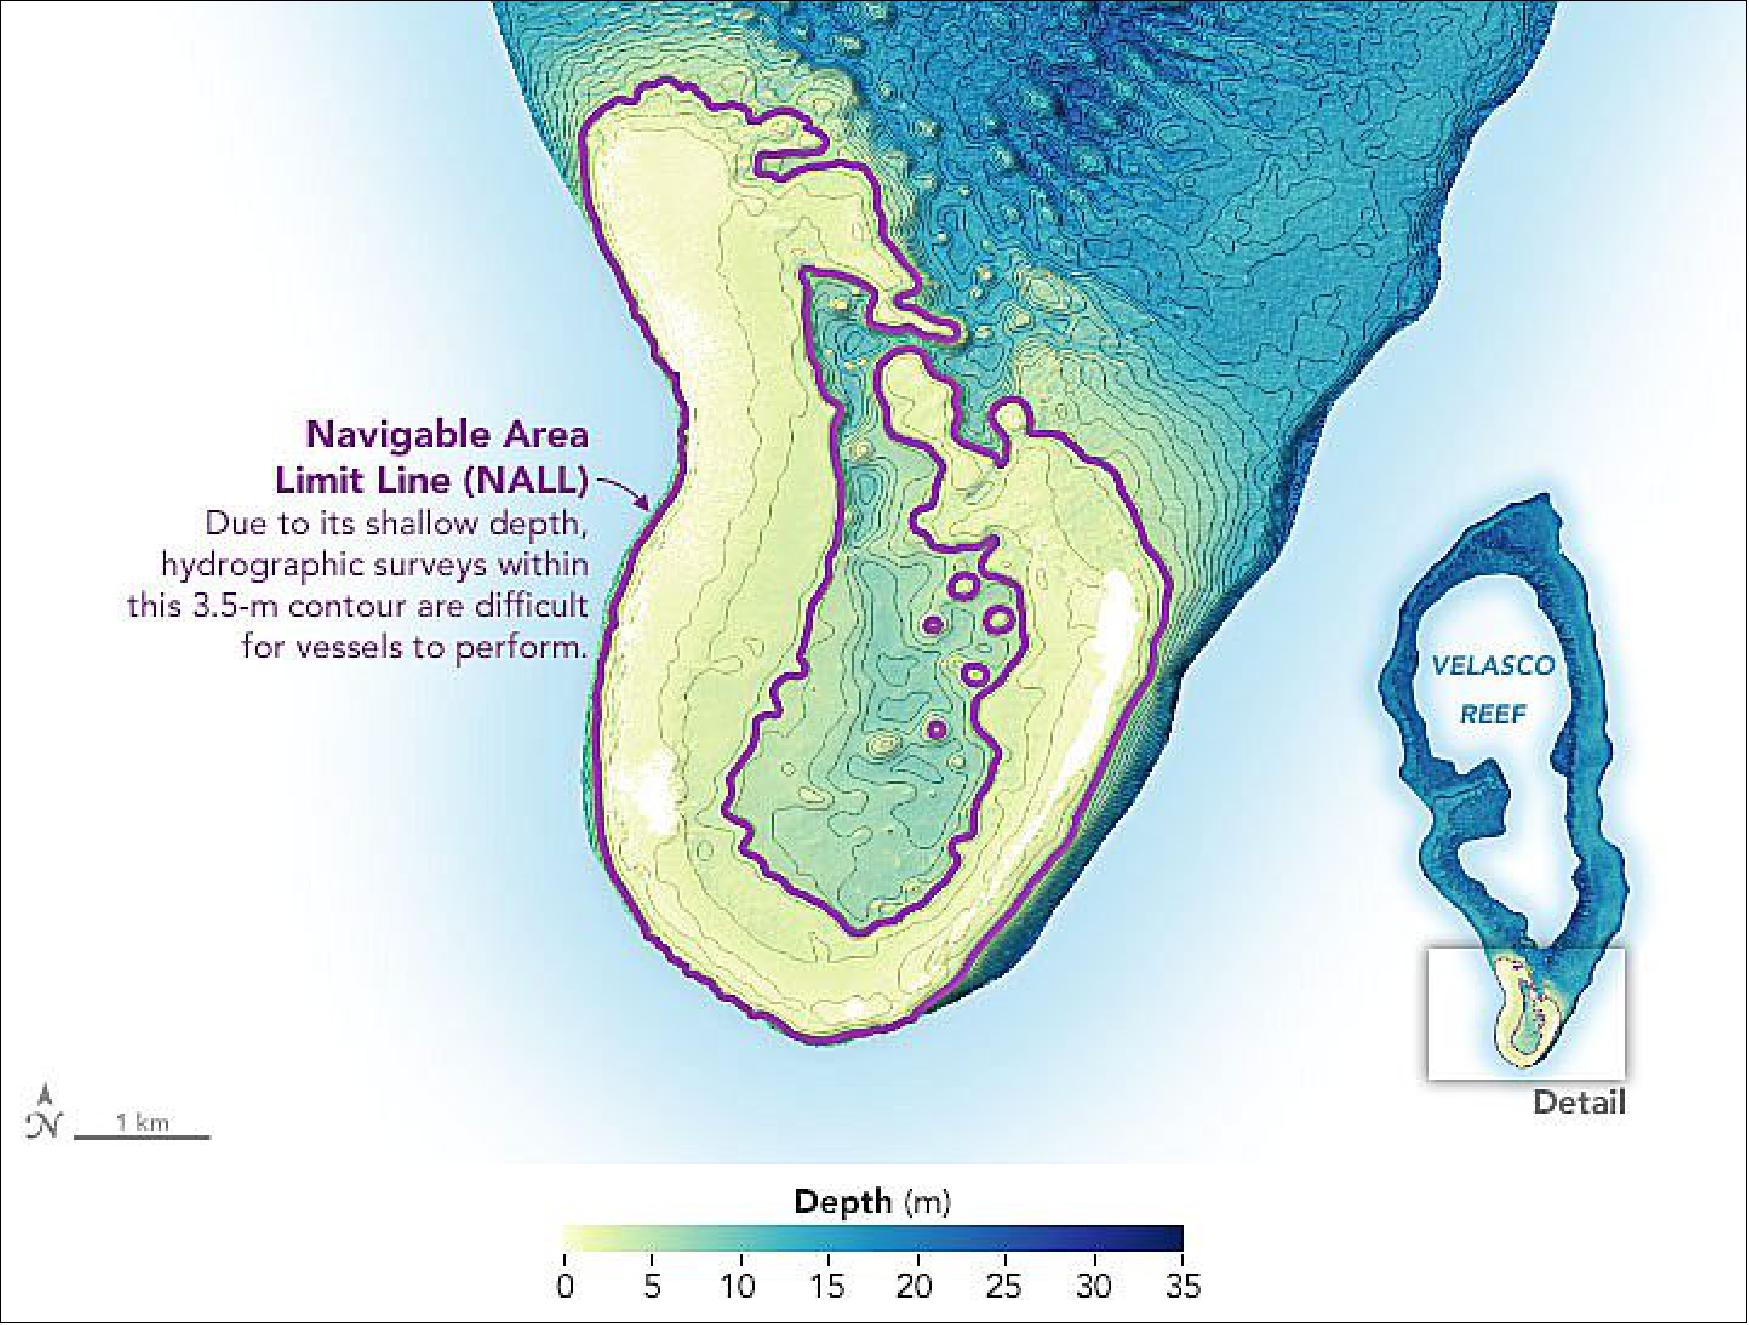 Figure 27: The maps show the NALL regions around Velasco Reef and the current water depths as measured by Magruder and Parrish’s team. This use of ICESat-2 data could be a game-changer (image credit: NASA Earth Observatory)